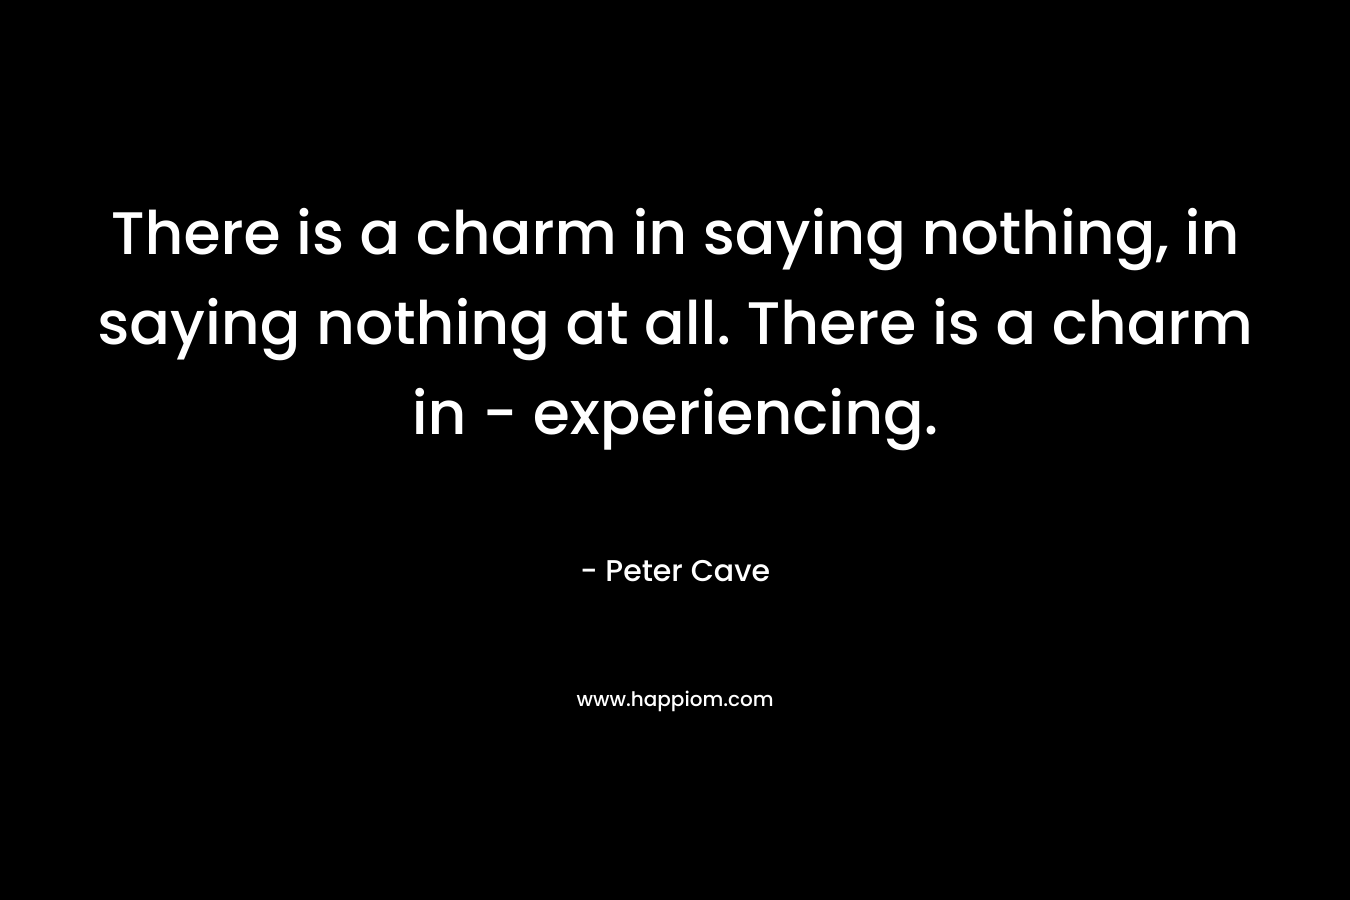 There is a charm in saying nothing, in saying nothing at all. There is a charm in - experiencing.